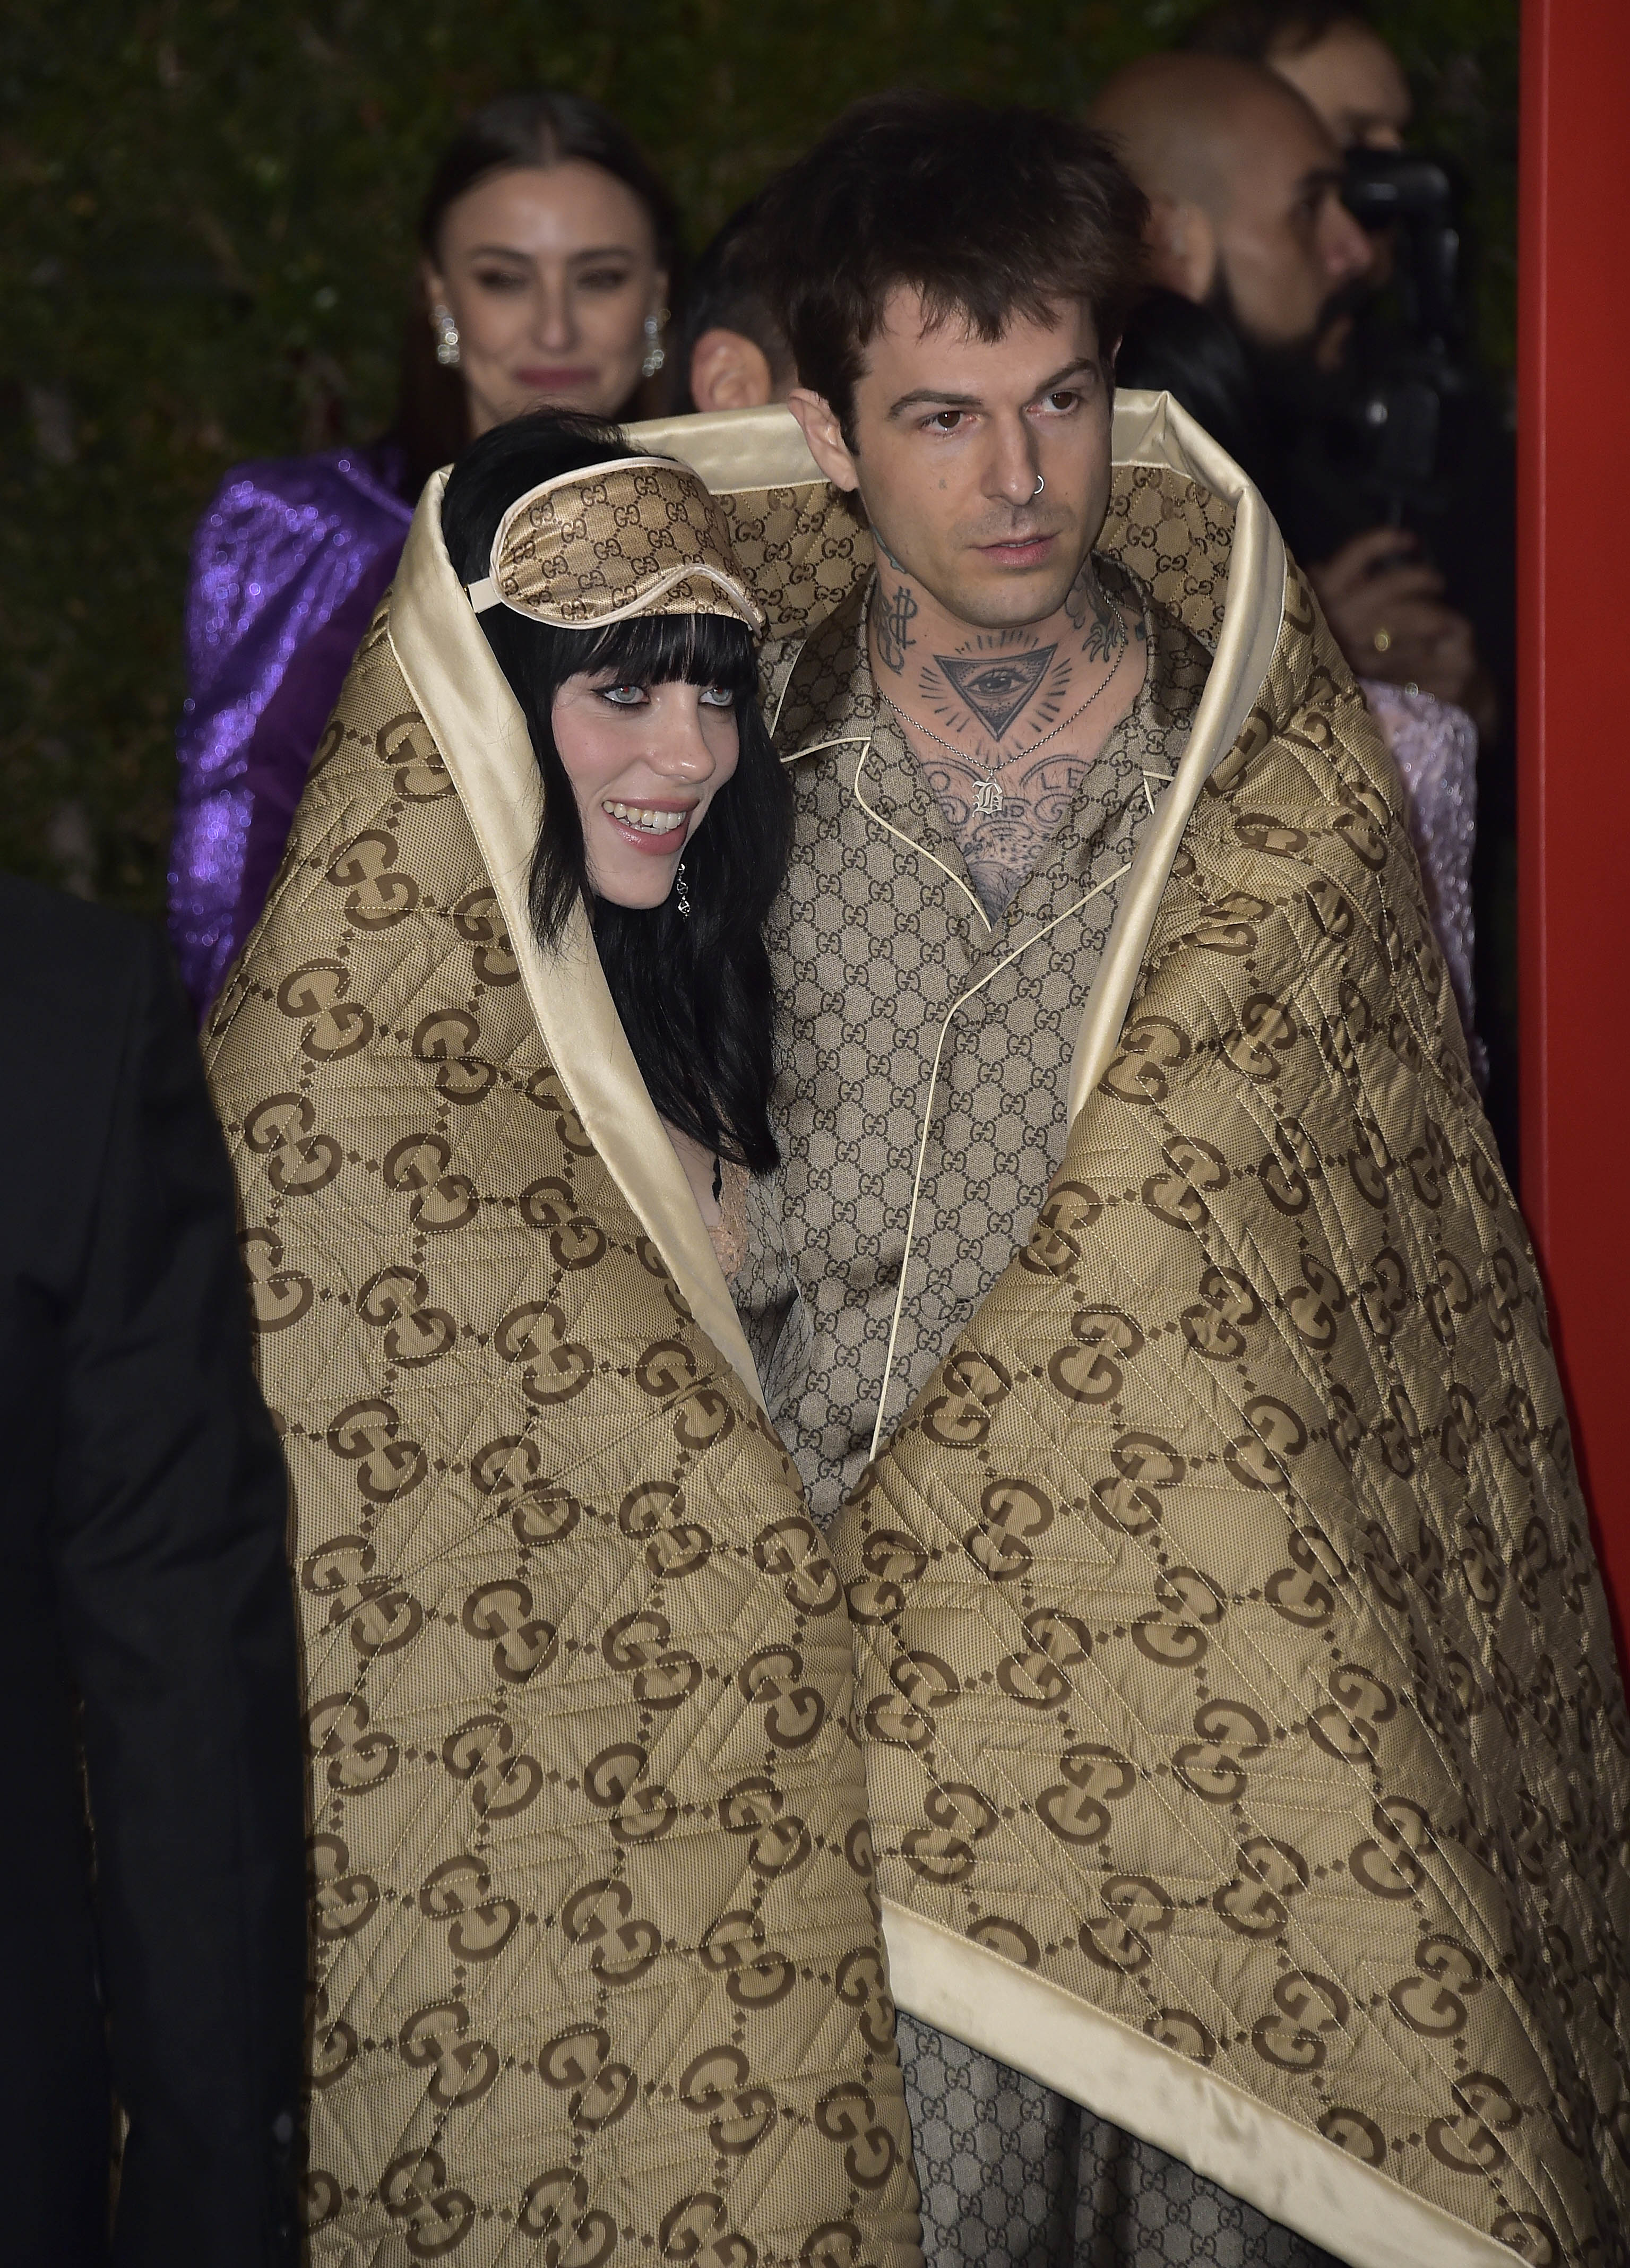 the two at an event under a blanket